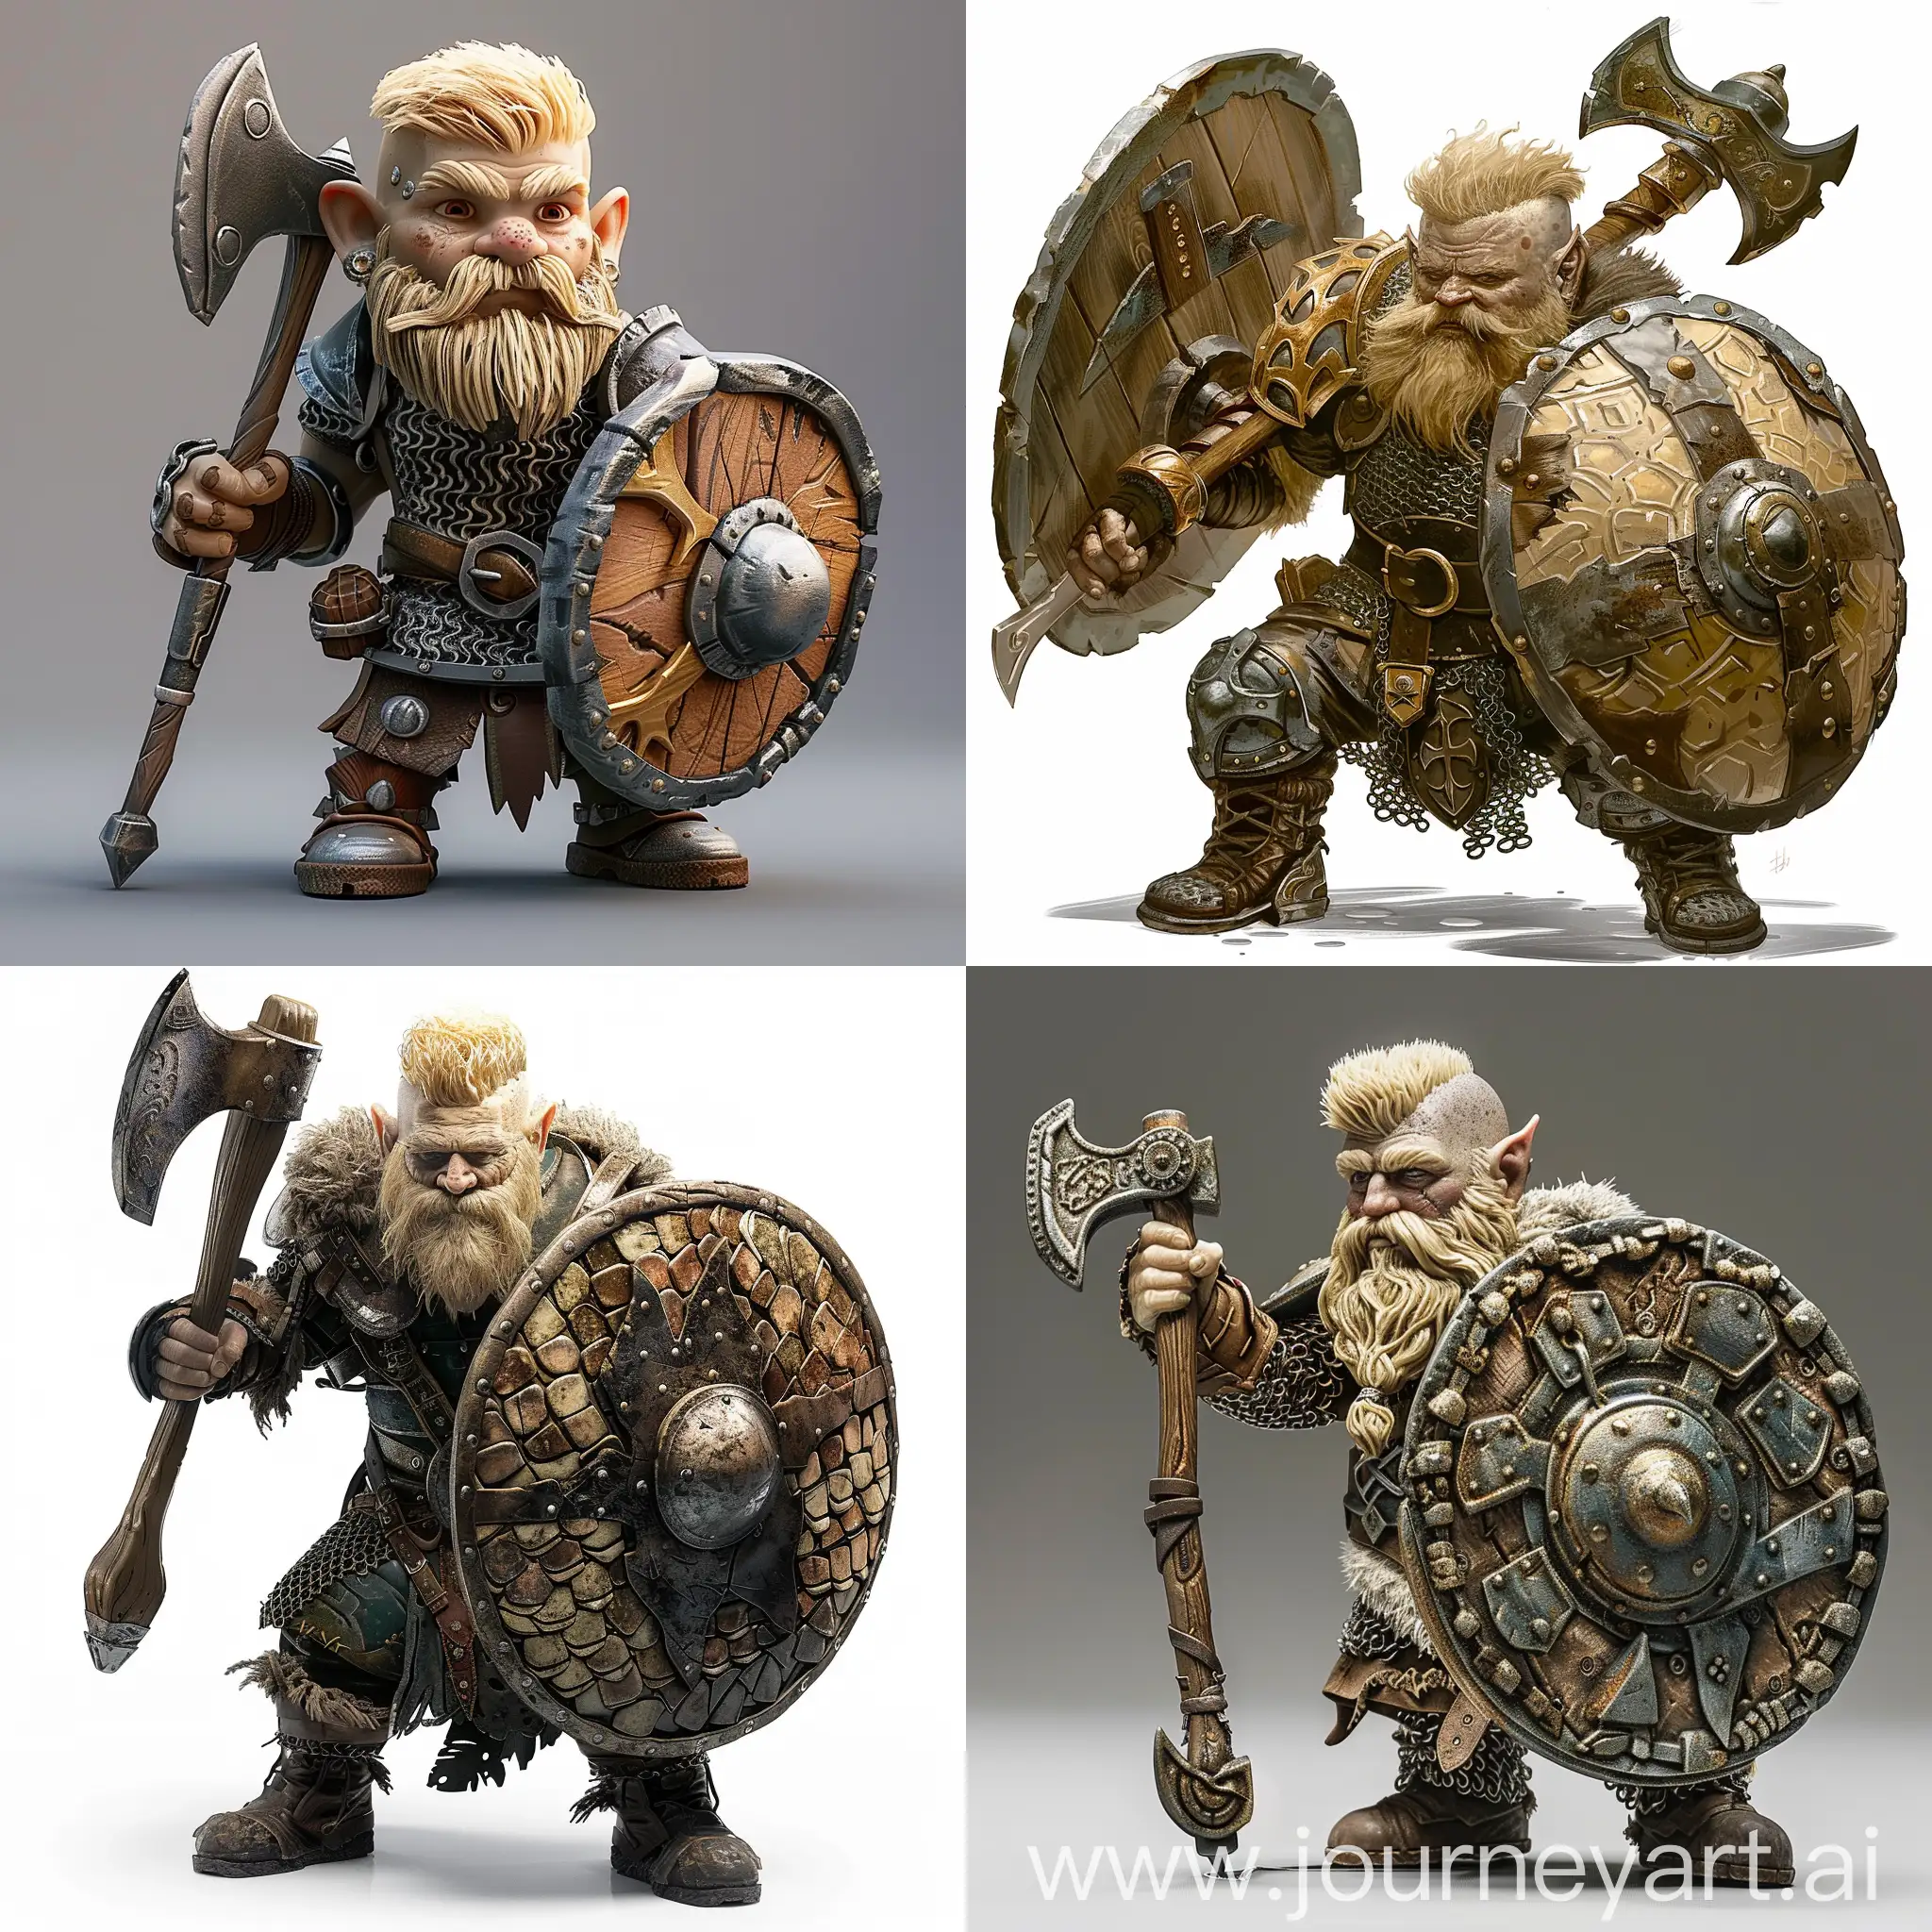 Blonde-Dwarf-Warrior-in-Scalemail-Armor-with-Shield-and-War-Axe